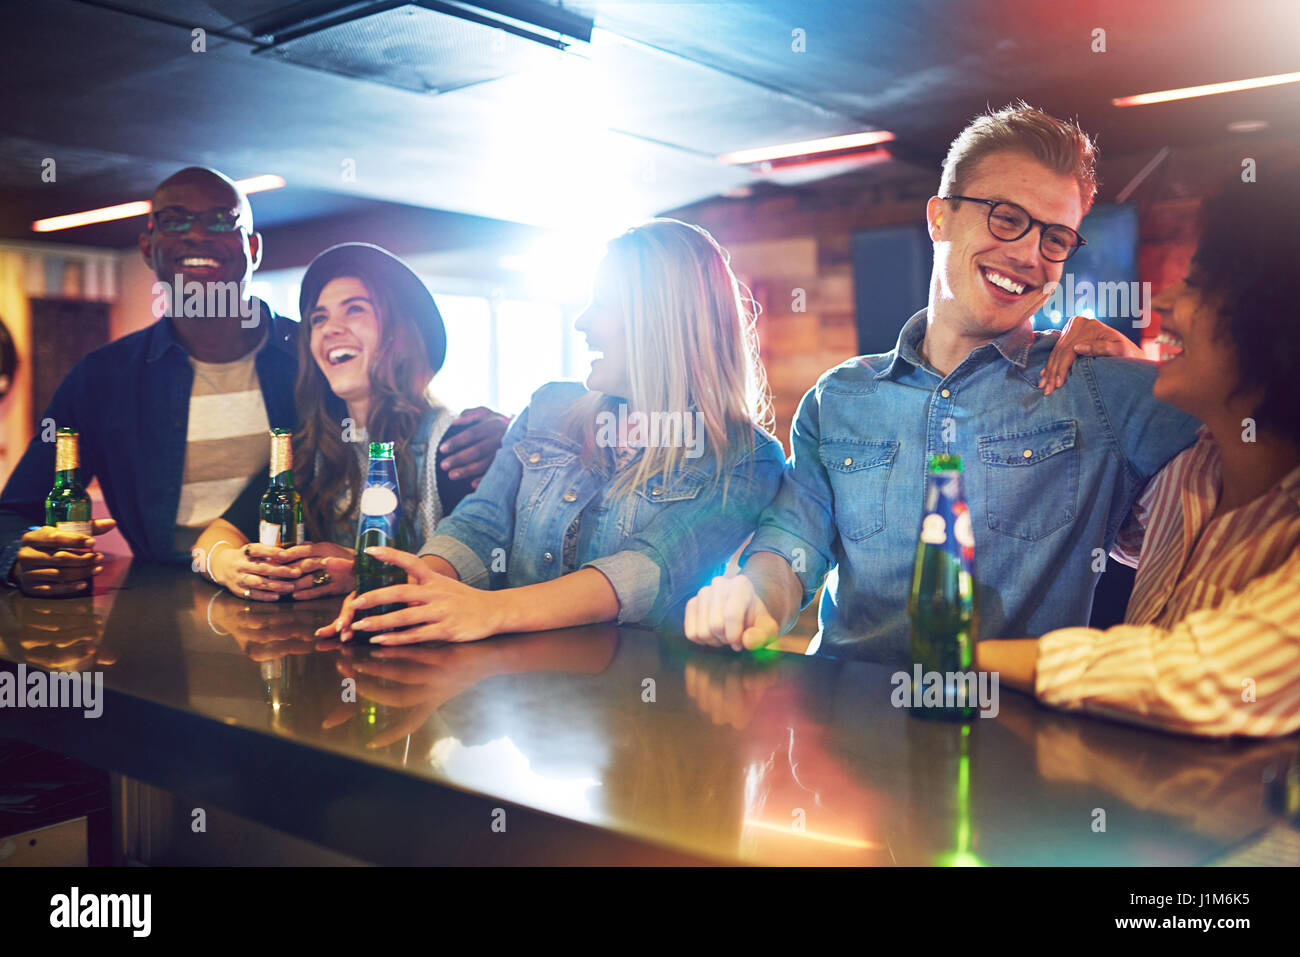 Sitting at the bar counter friends laughing and talking to each other while having a beer. Stock Photo